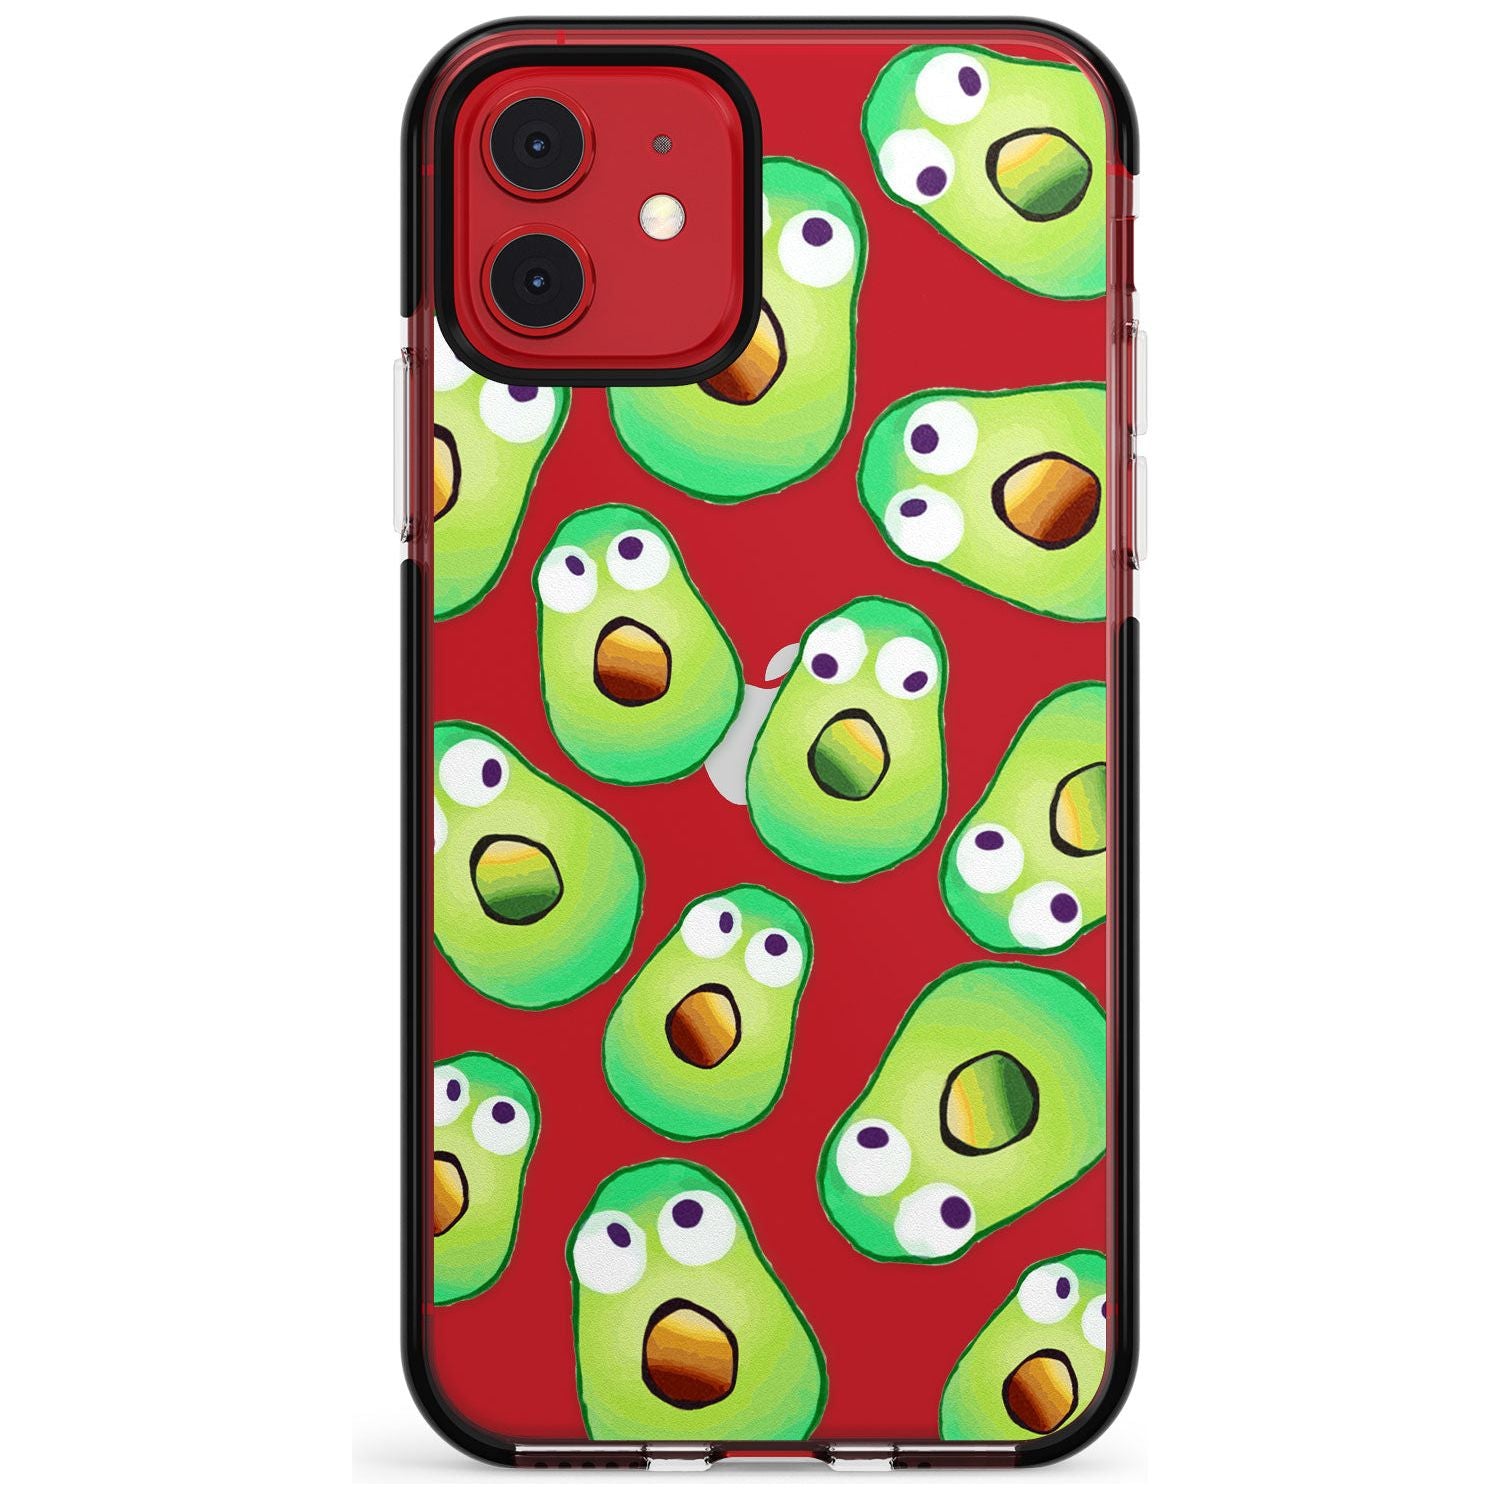 Shocked Avocados Black Impact Phone Case for iPhone 11 Pro Max